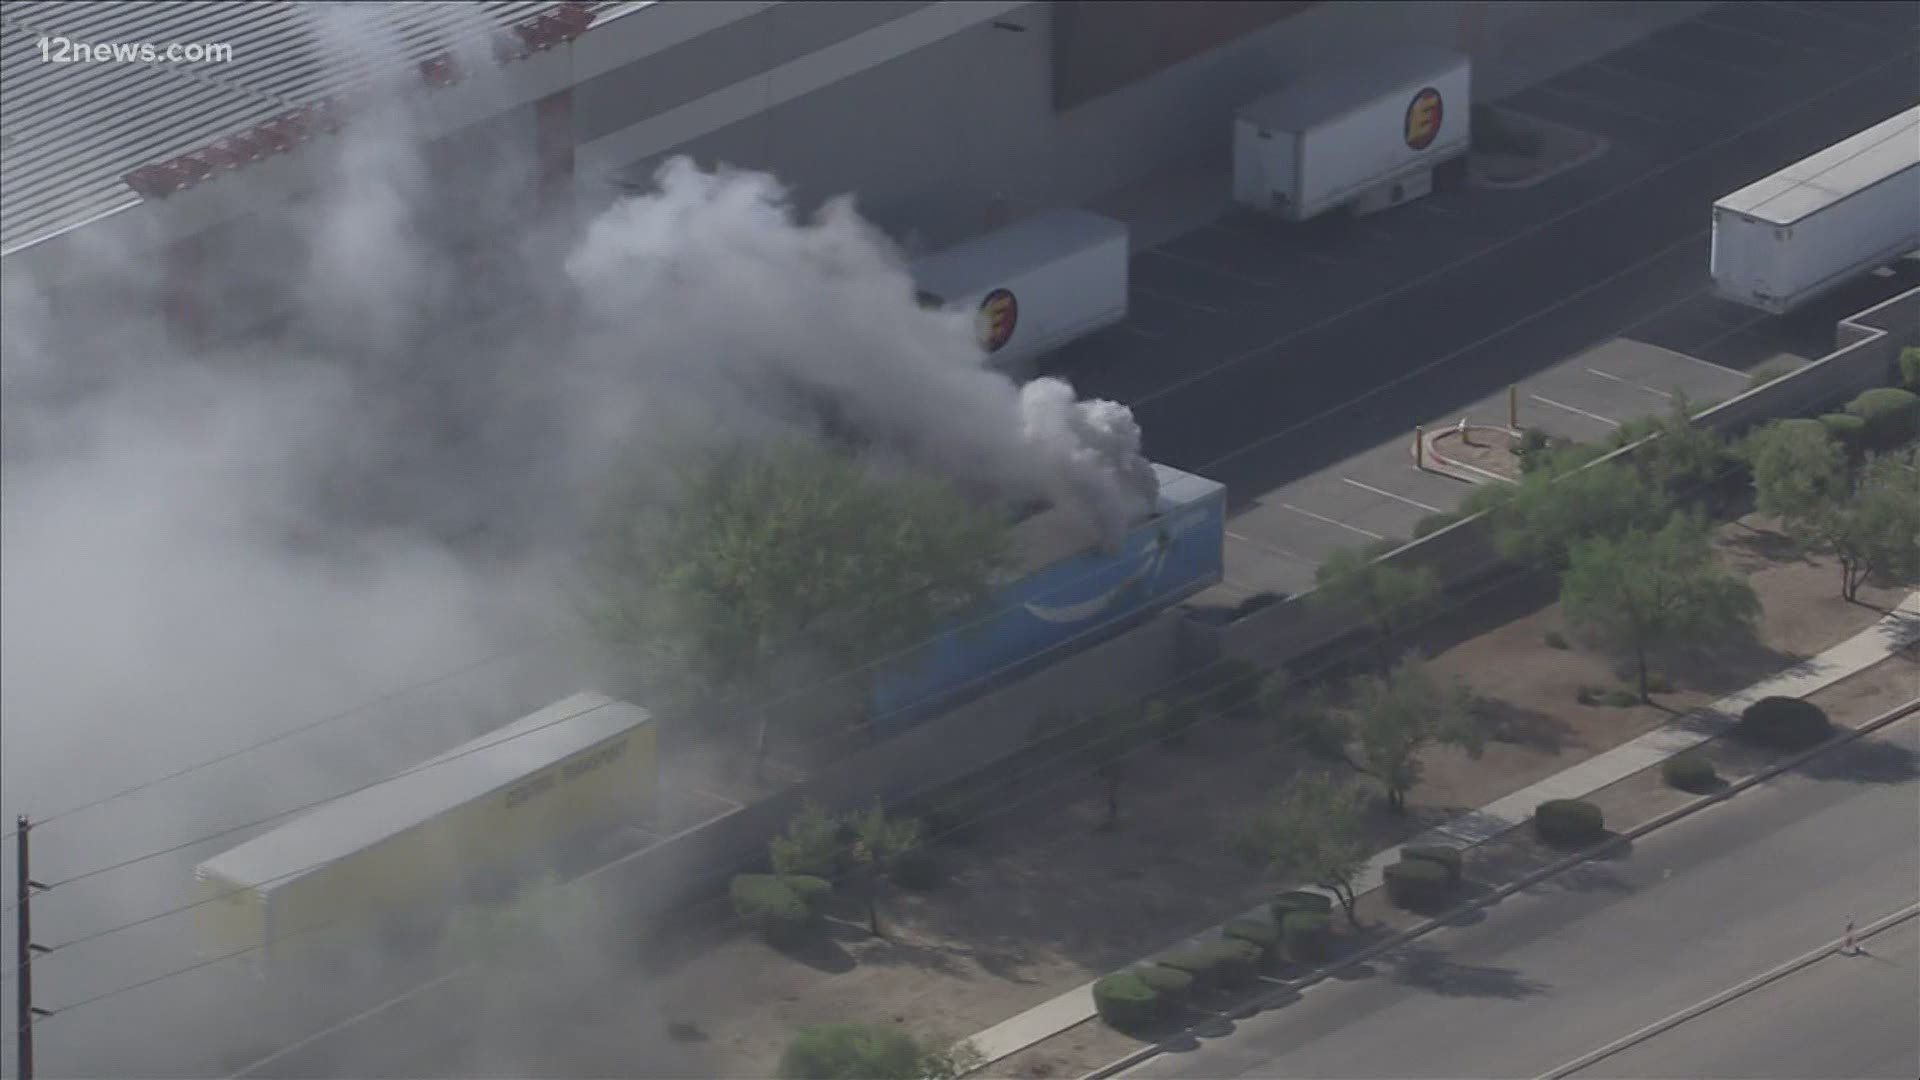 An Amazon fulfillment center in Phoenix is currently under a hazardous material incident situation as smoke billows from a semi-truck trailer. Jen Wahl has more.